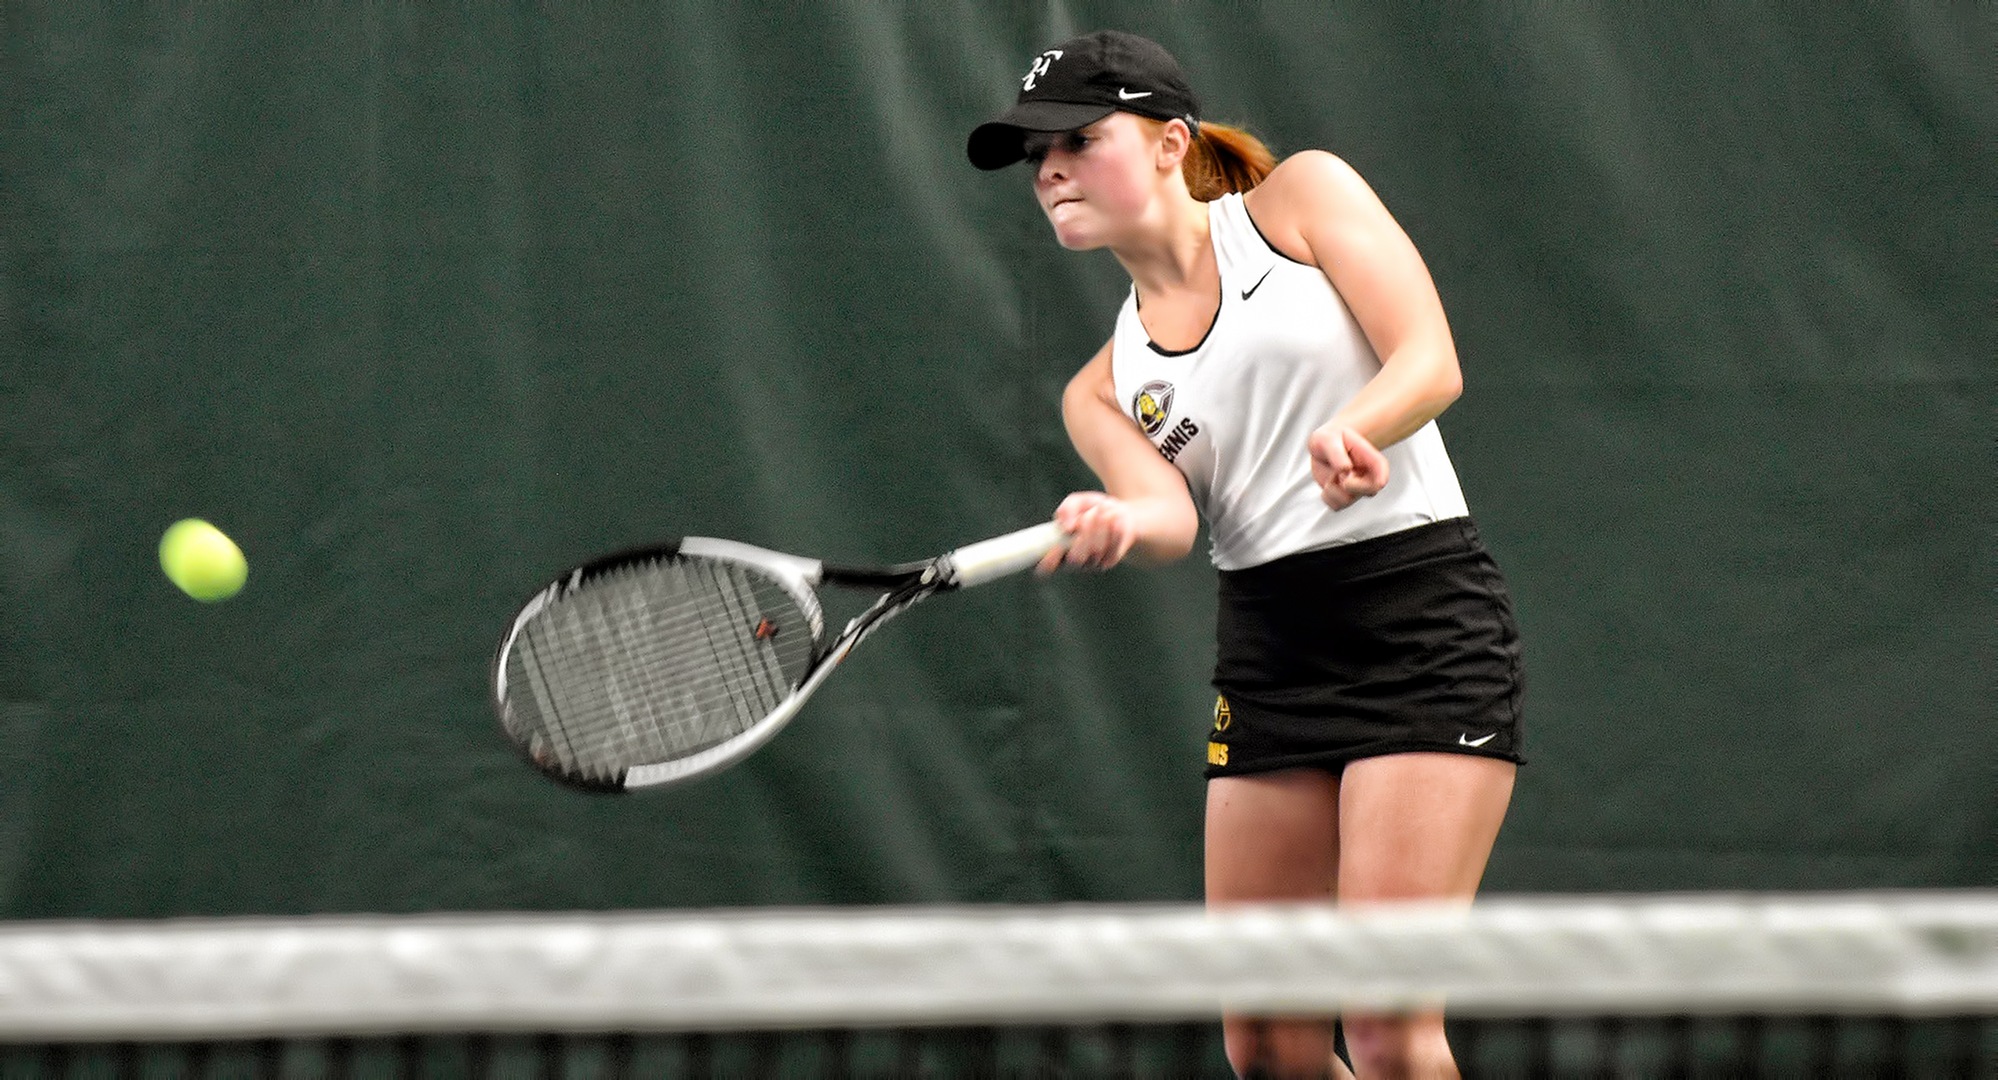 Junior Brianna Bell rolled to a 6-2, 6-0 straight set victory in her match at No.5 singles and helped the Cobbers post a 4-3 win over Midway.